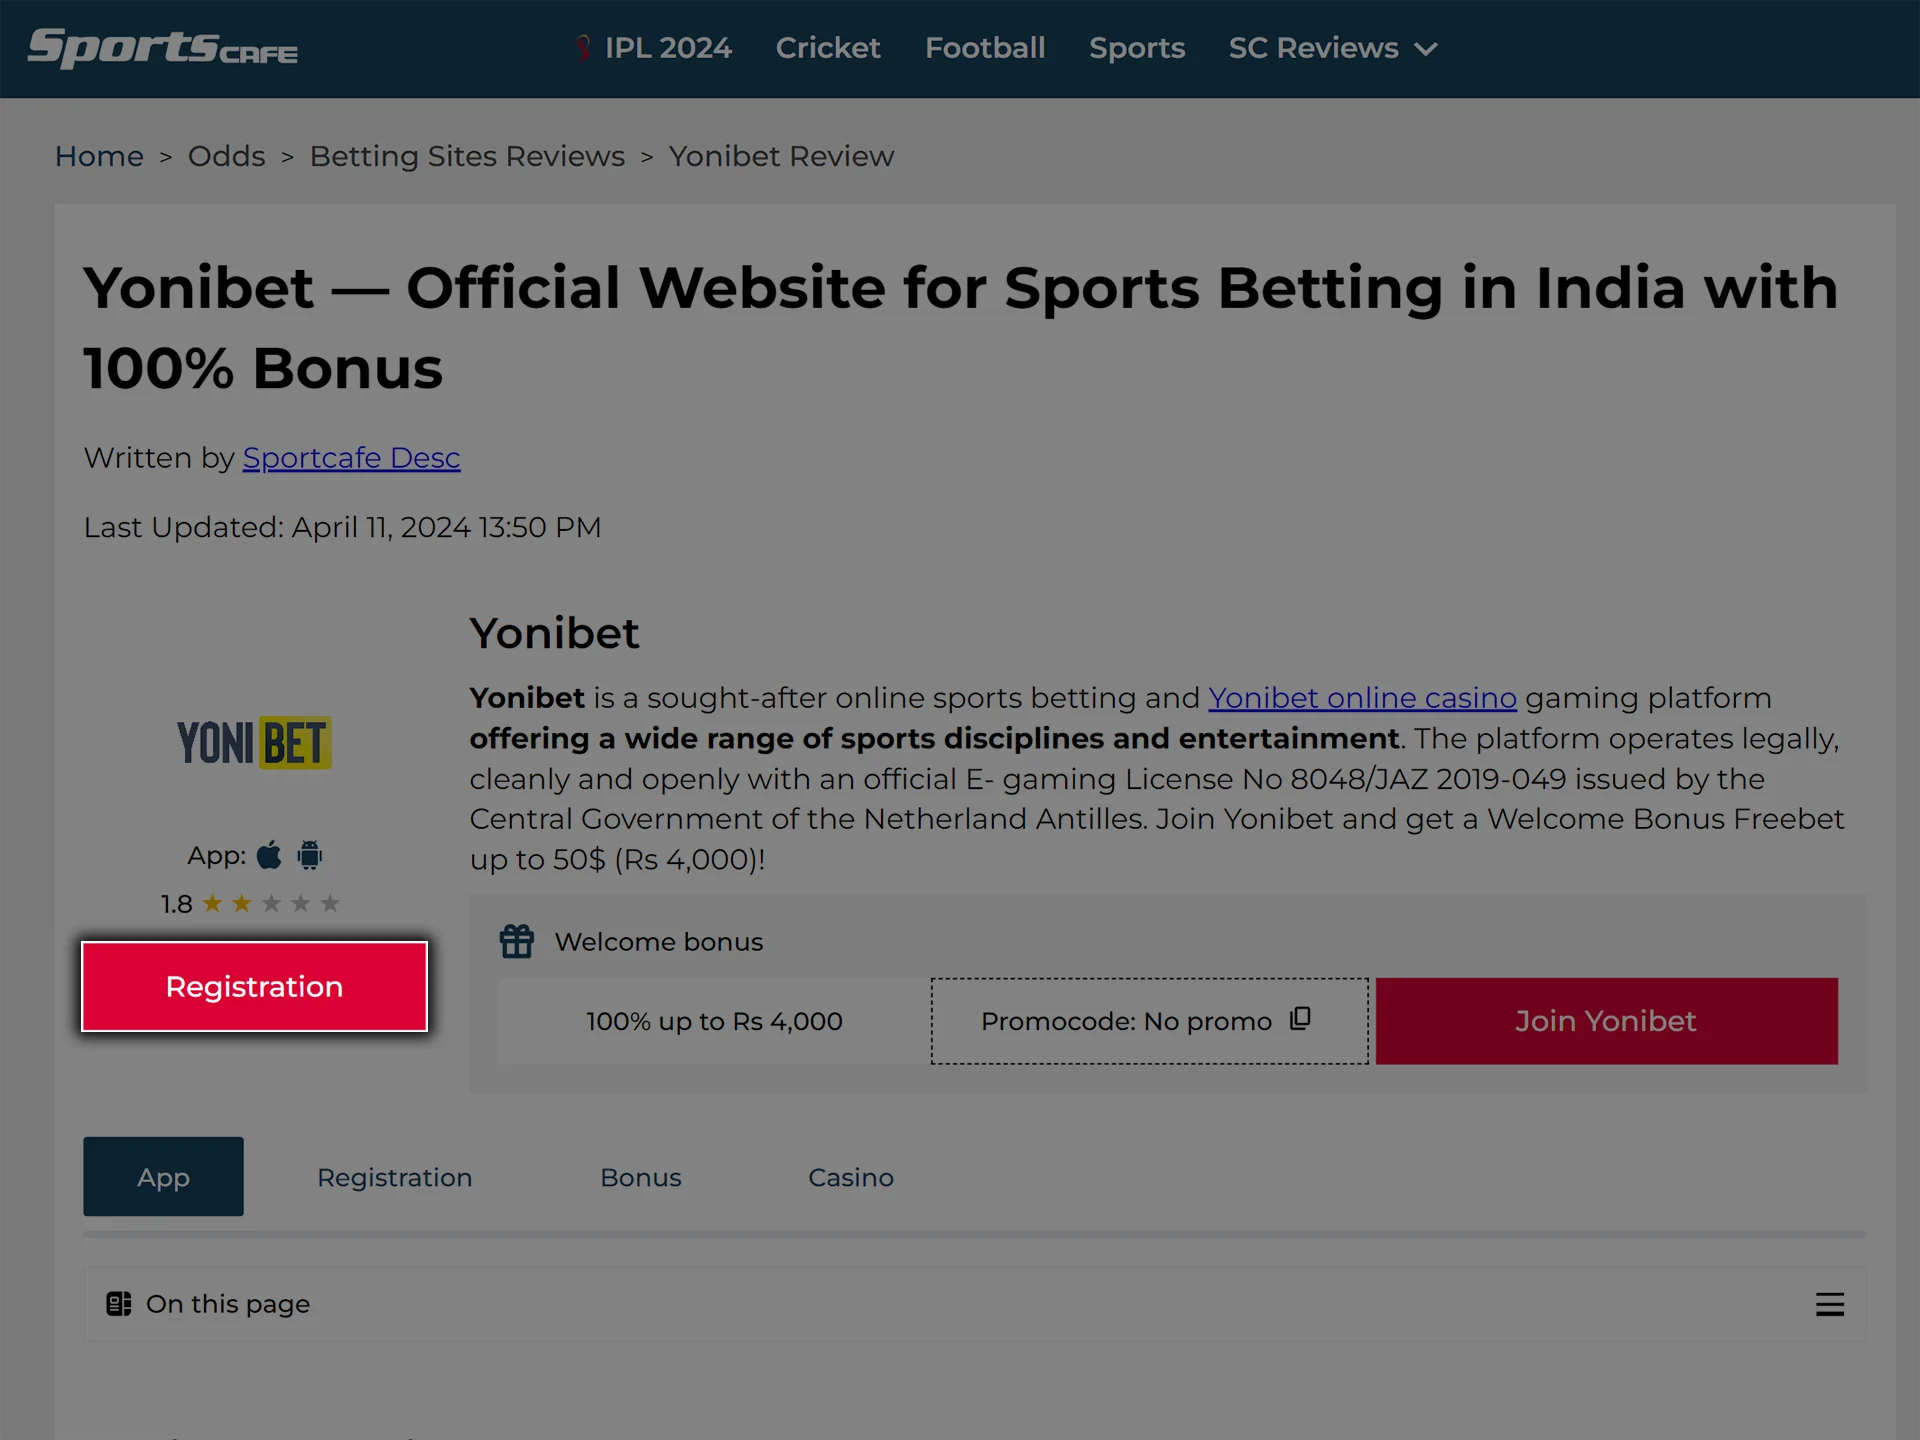 Click on the button to open the Yonibet website.